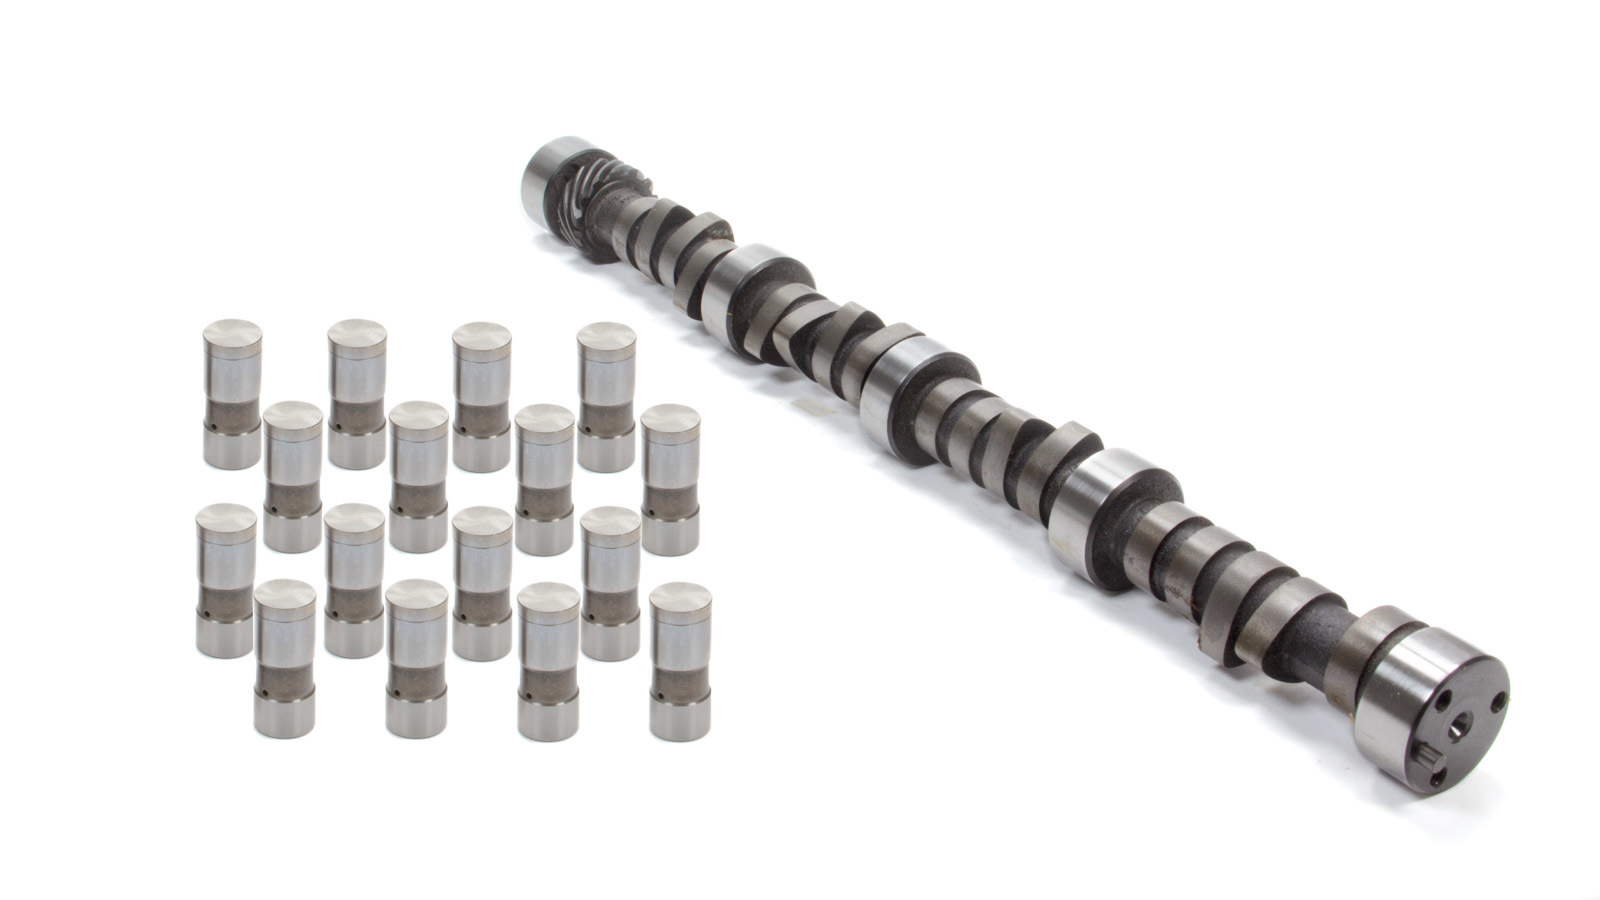 Elgin CL-1787PK Camshaft / Lifters, RV Camshaft, Hydraulic Flat Tappet, Lift 0.428 / 0.428 in, Duration 260 / 260, 115 LSA, 1500 / 4000 RPM, Small Block Chevy, Kit